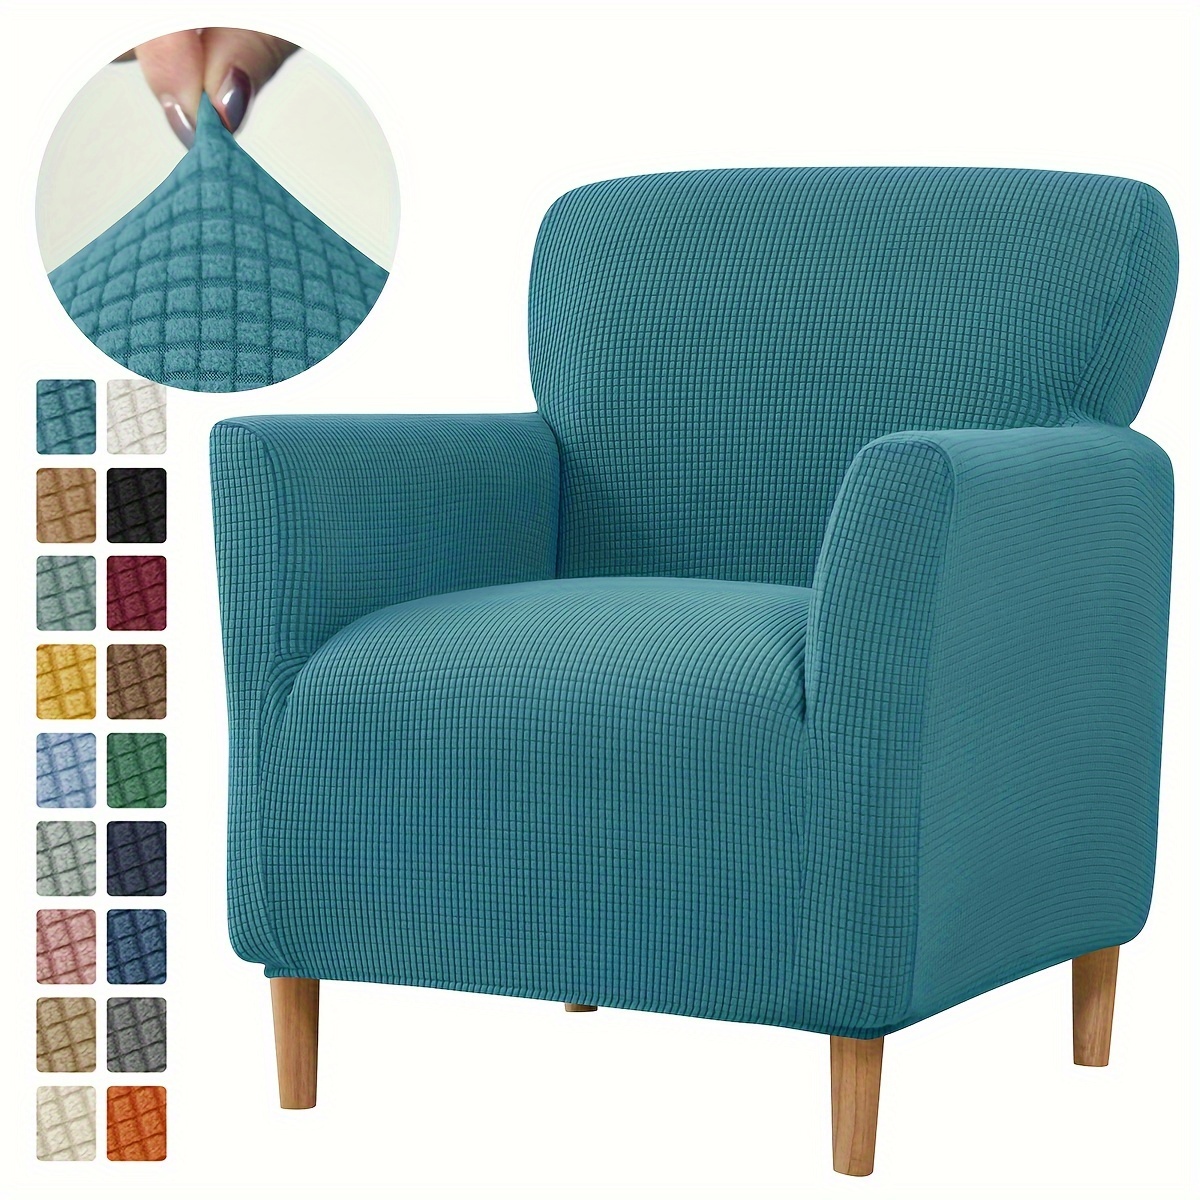 

Modern Stretch Waffle-knit Armchair Slipcover With Slip-resistant Design, Machine Washable Polyester And Spandex Chair Cover, Elastic-band Closure For Easy Fit - Compatible With Standard Armchairs